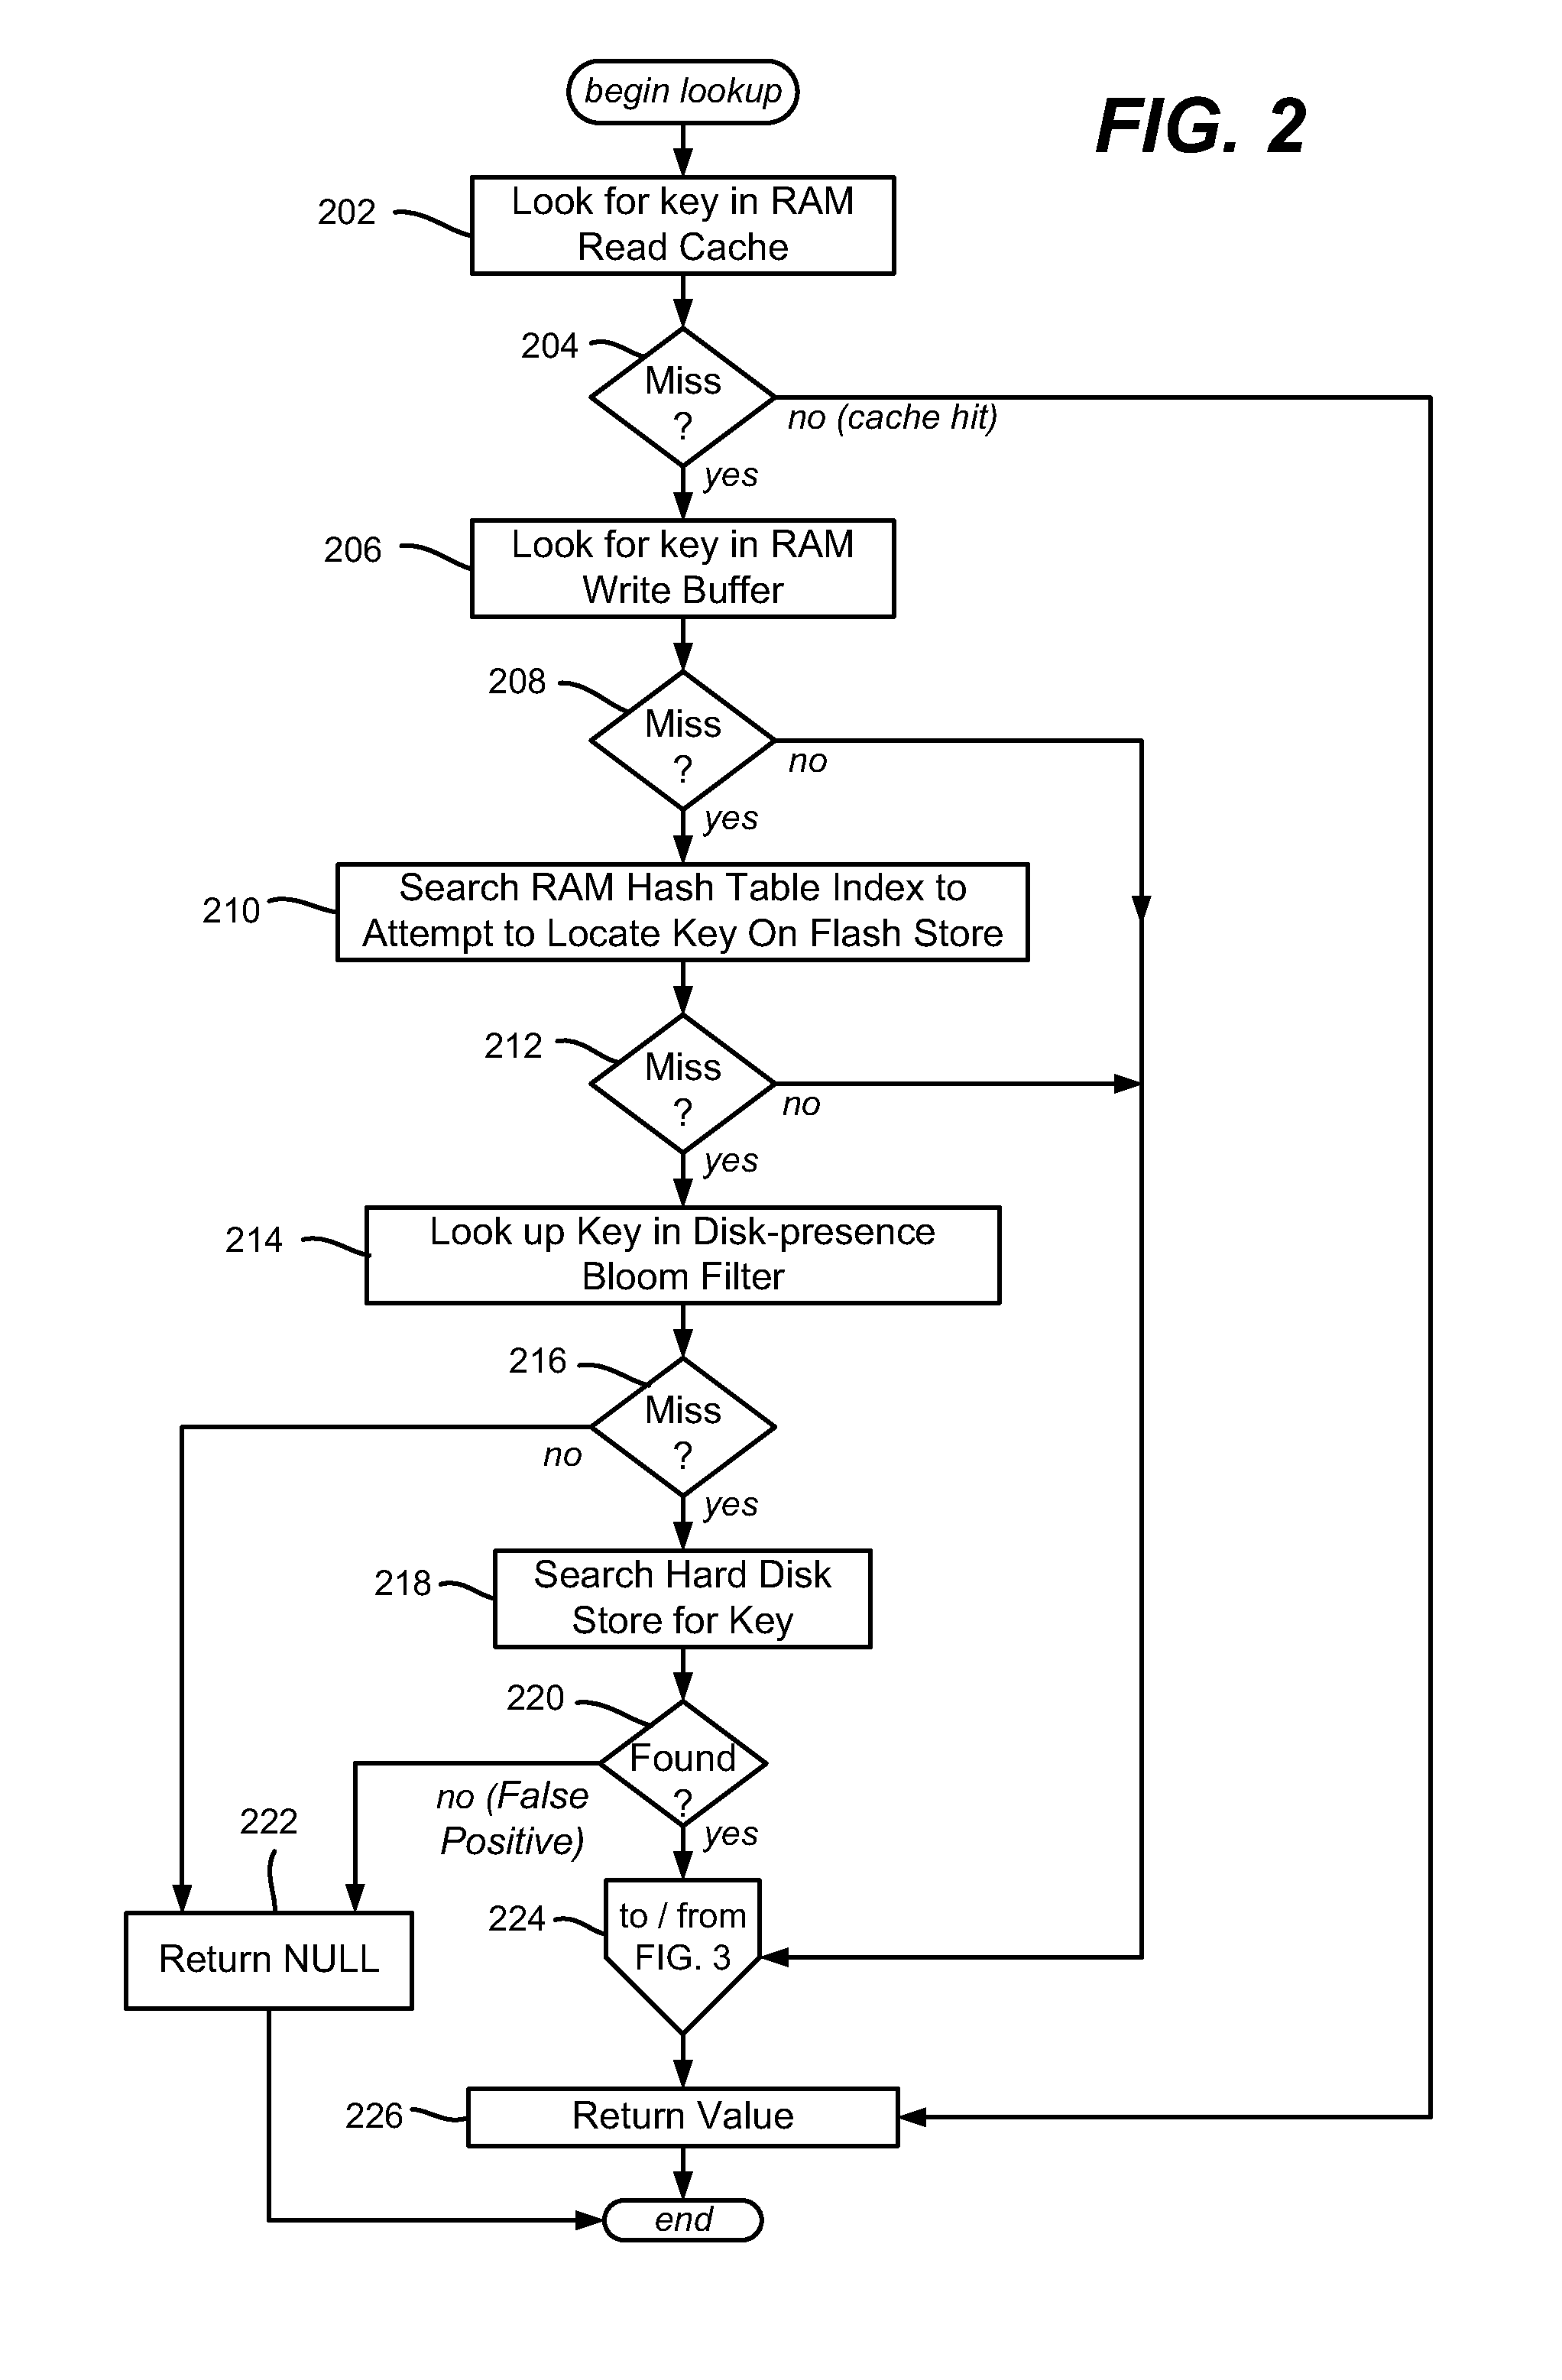 Flash memory cache including for use with persistent key-value store